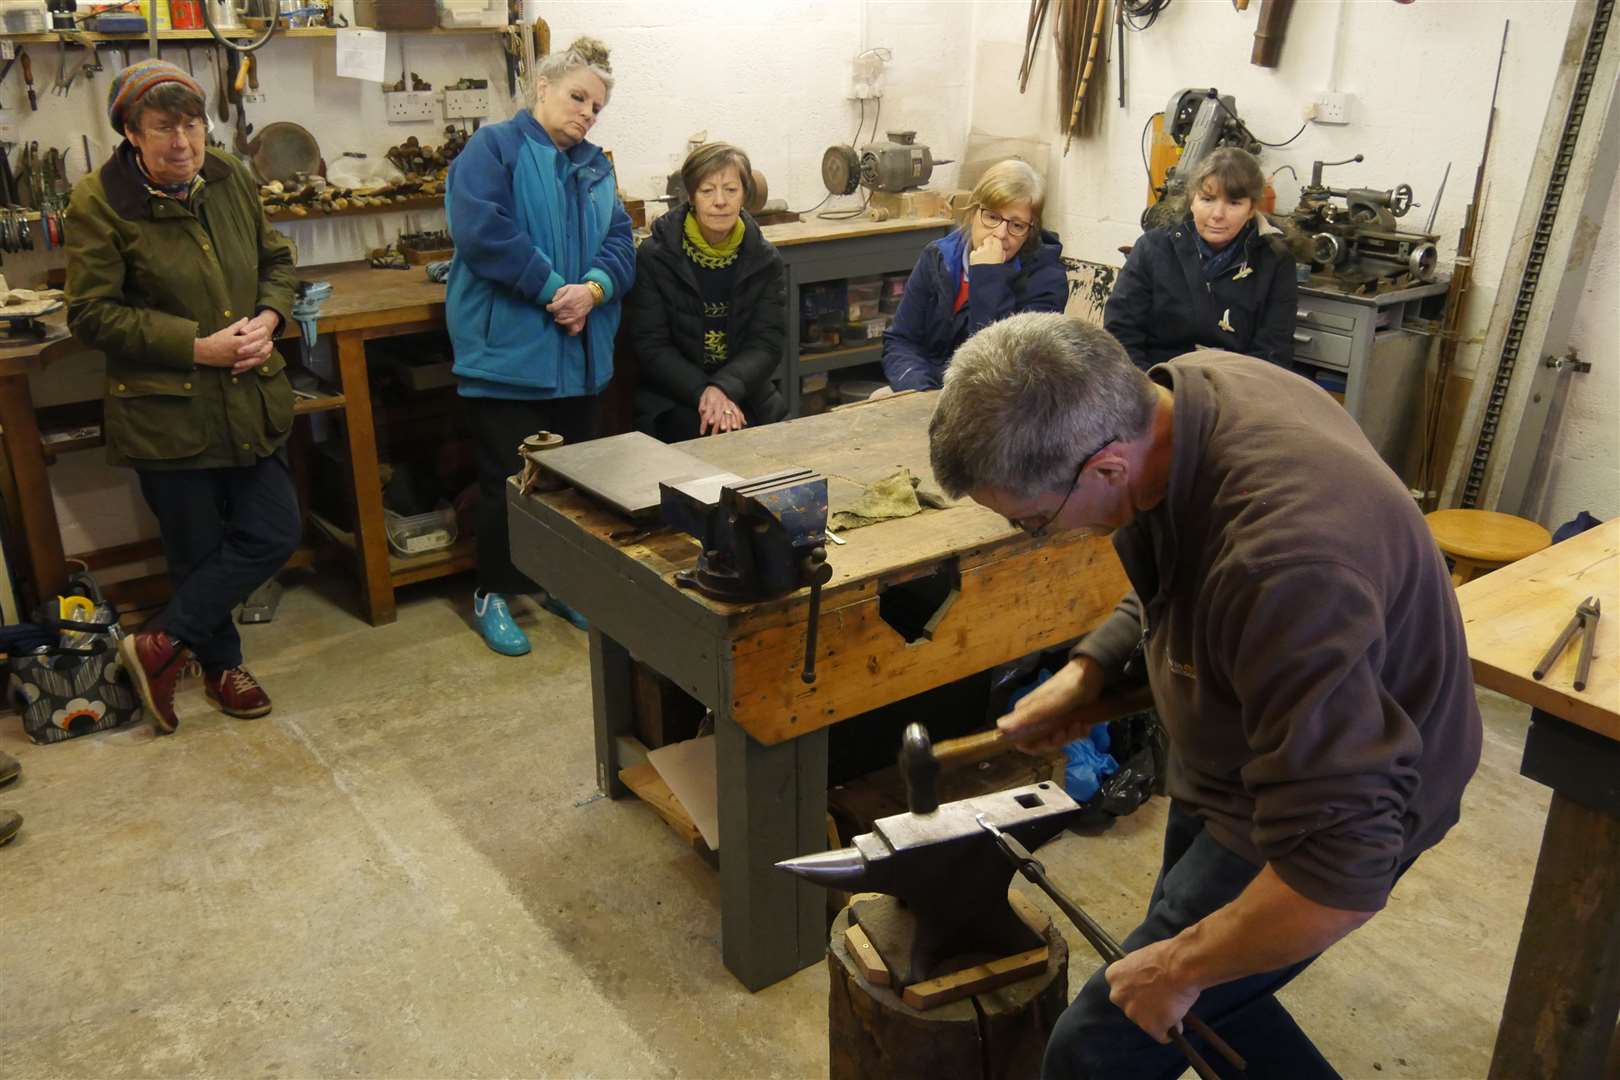 From left: Anne Coombs, Karen Clarke, Barbara Morrison, Kerry MacKay and Adele Gallagher watching closely as Peter begins to ‘grow’ the spoon from the ingot. Picture: Peter Wild